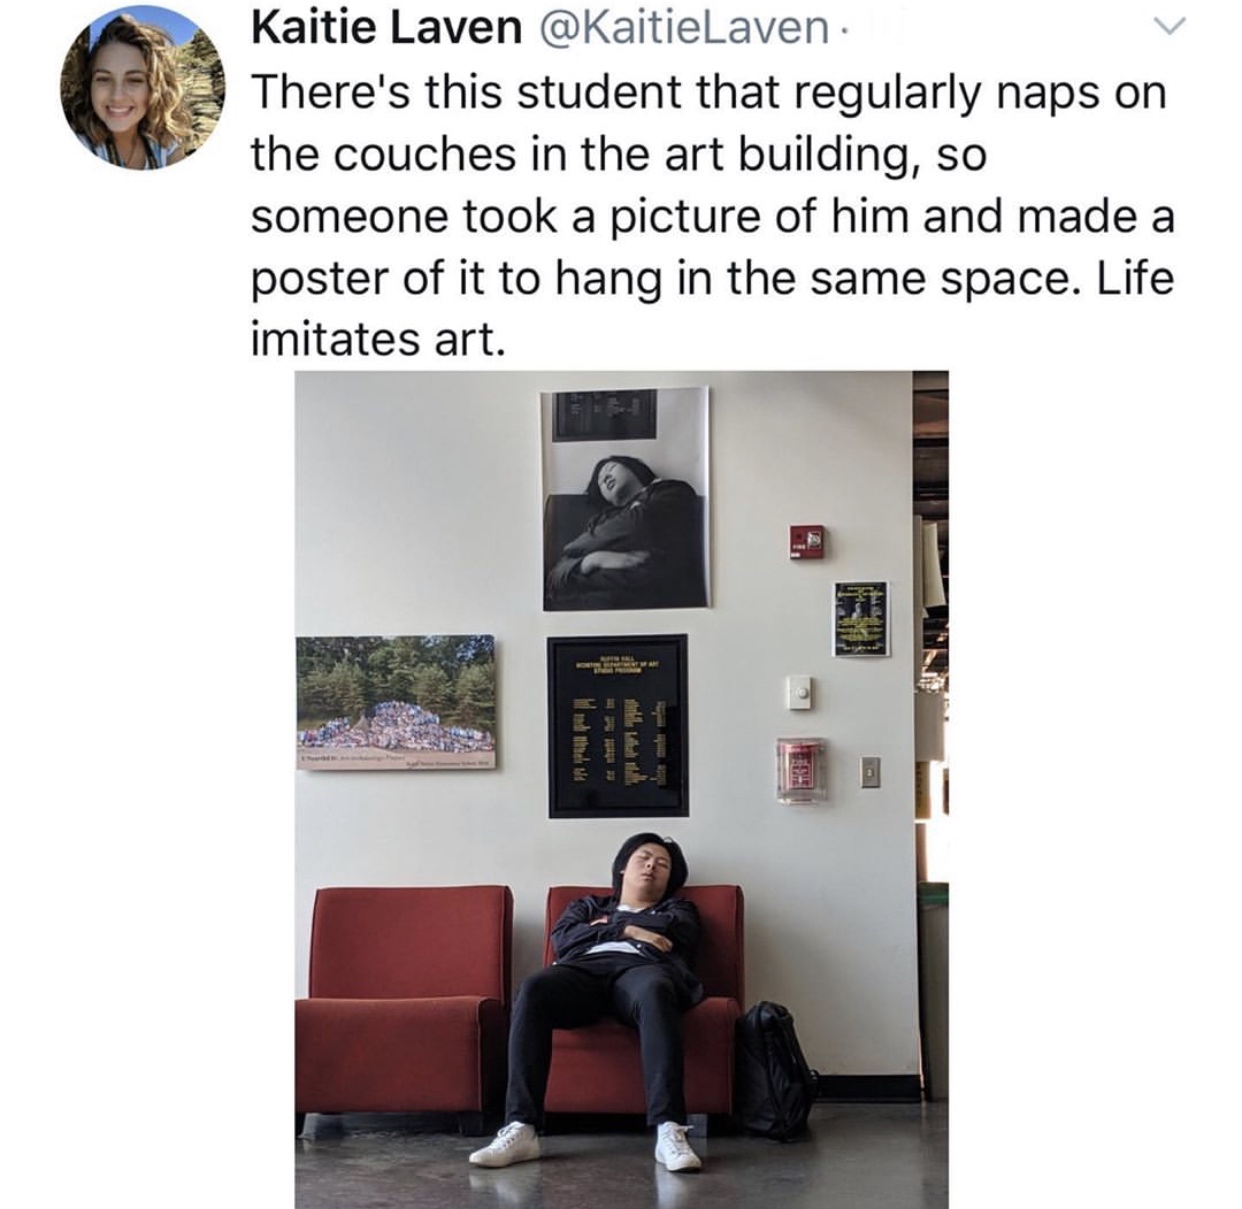 wholesome meme - chair - Kaitie Laven There's this student that regularly naps on the couches in the art building, so someone took a picture of him and made a poster of it to hang in the same space. Life imitates art. W ndi theel